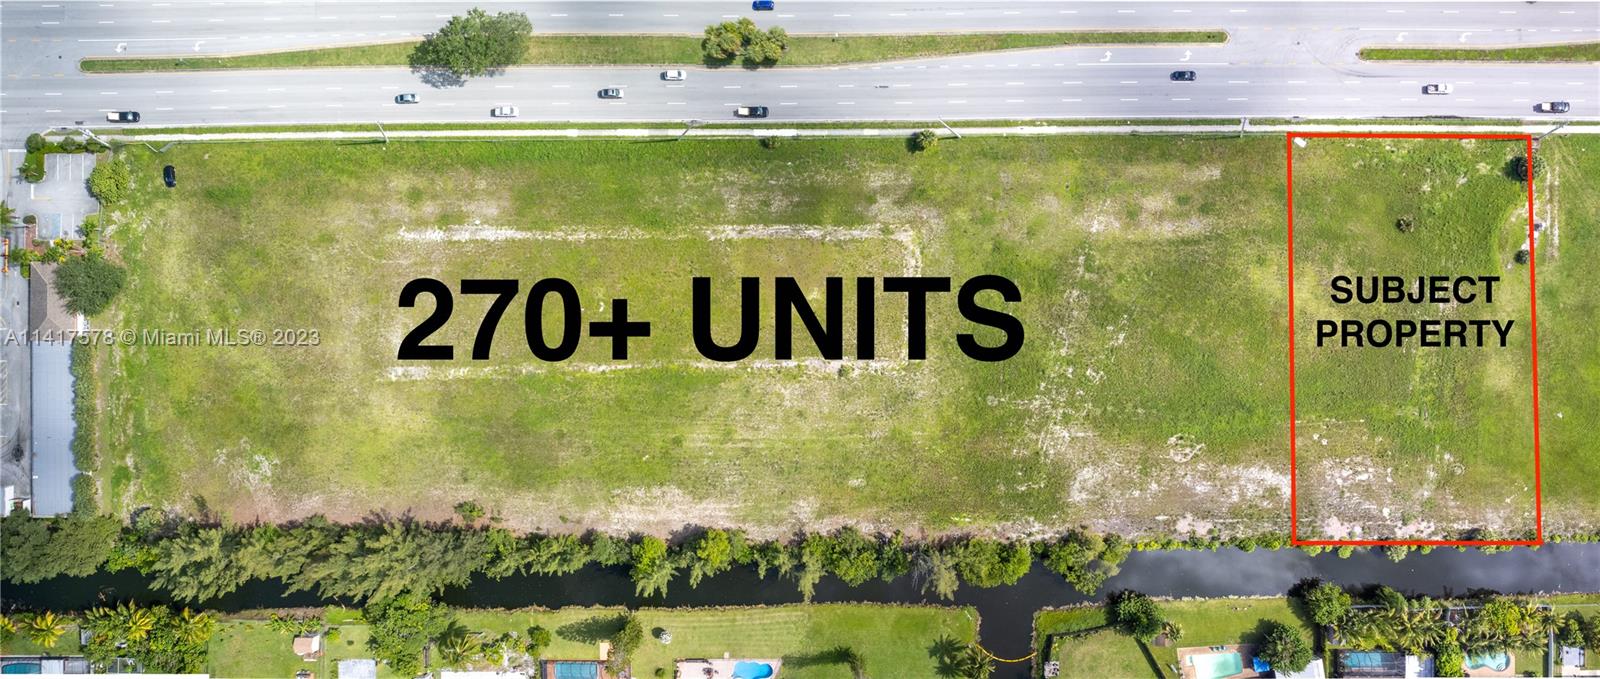 Property for Sale at Address Not Disclosed, Lauderhill, Miami-Dade County, Florida -  - $1,650,000